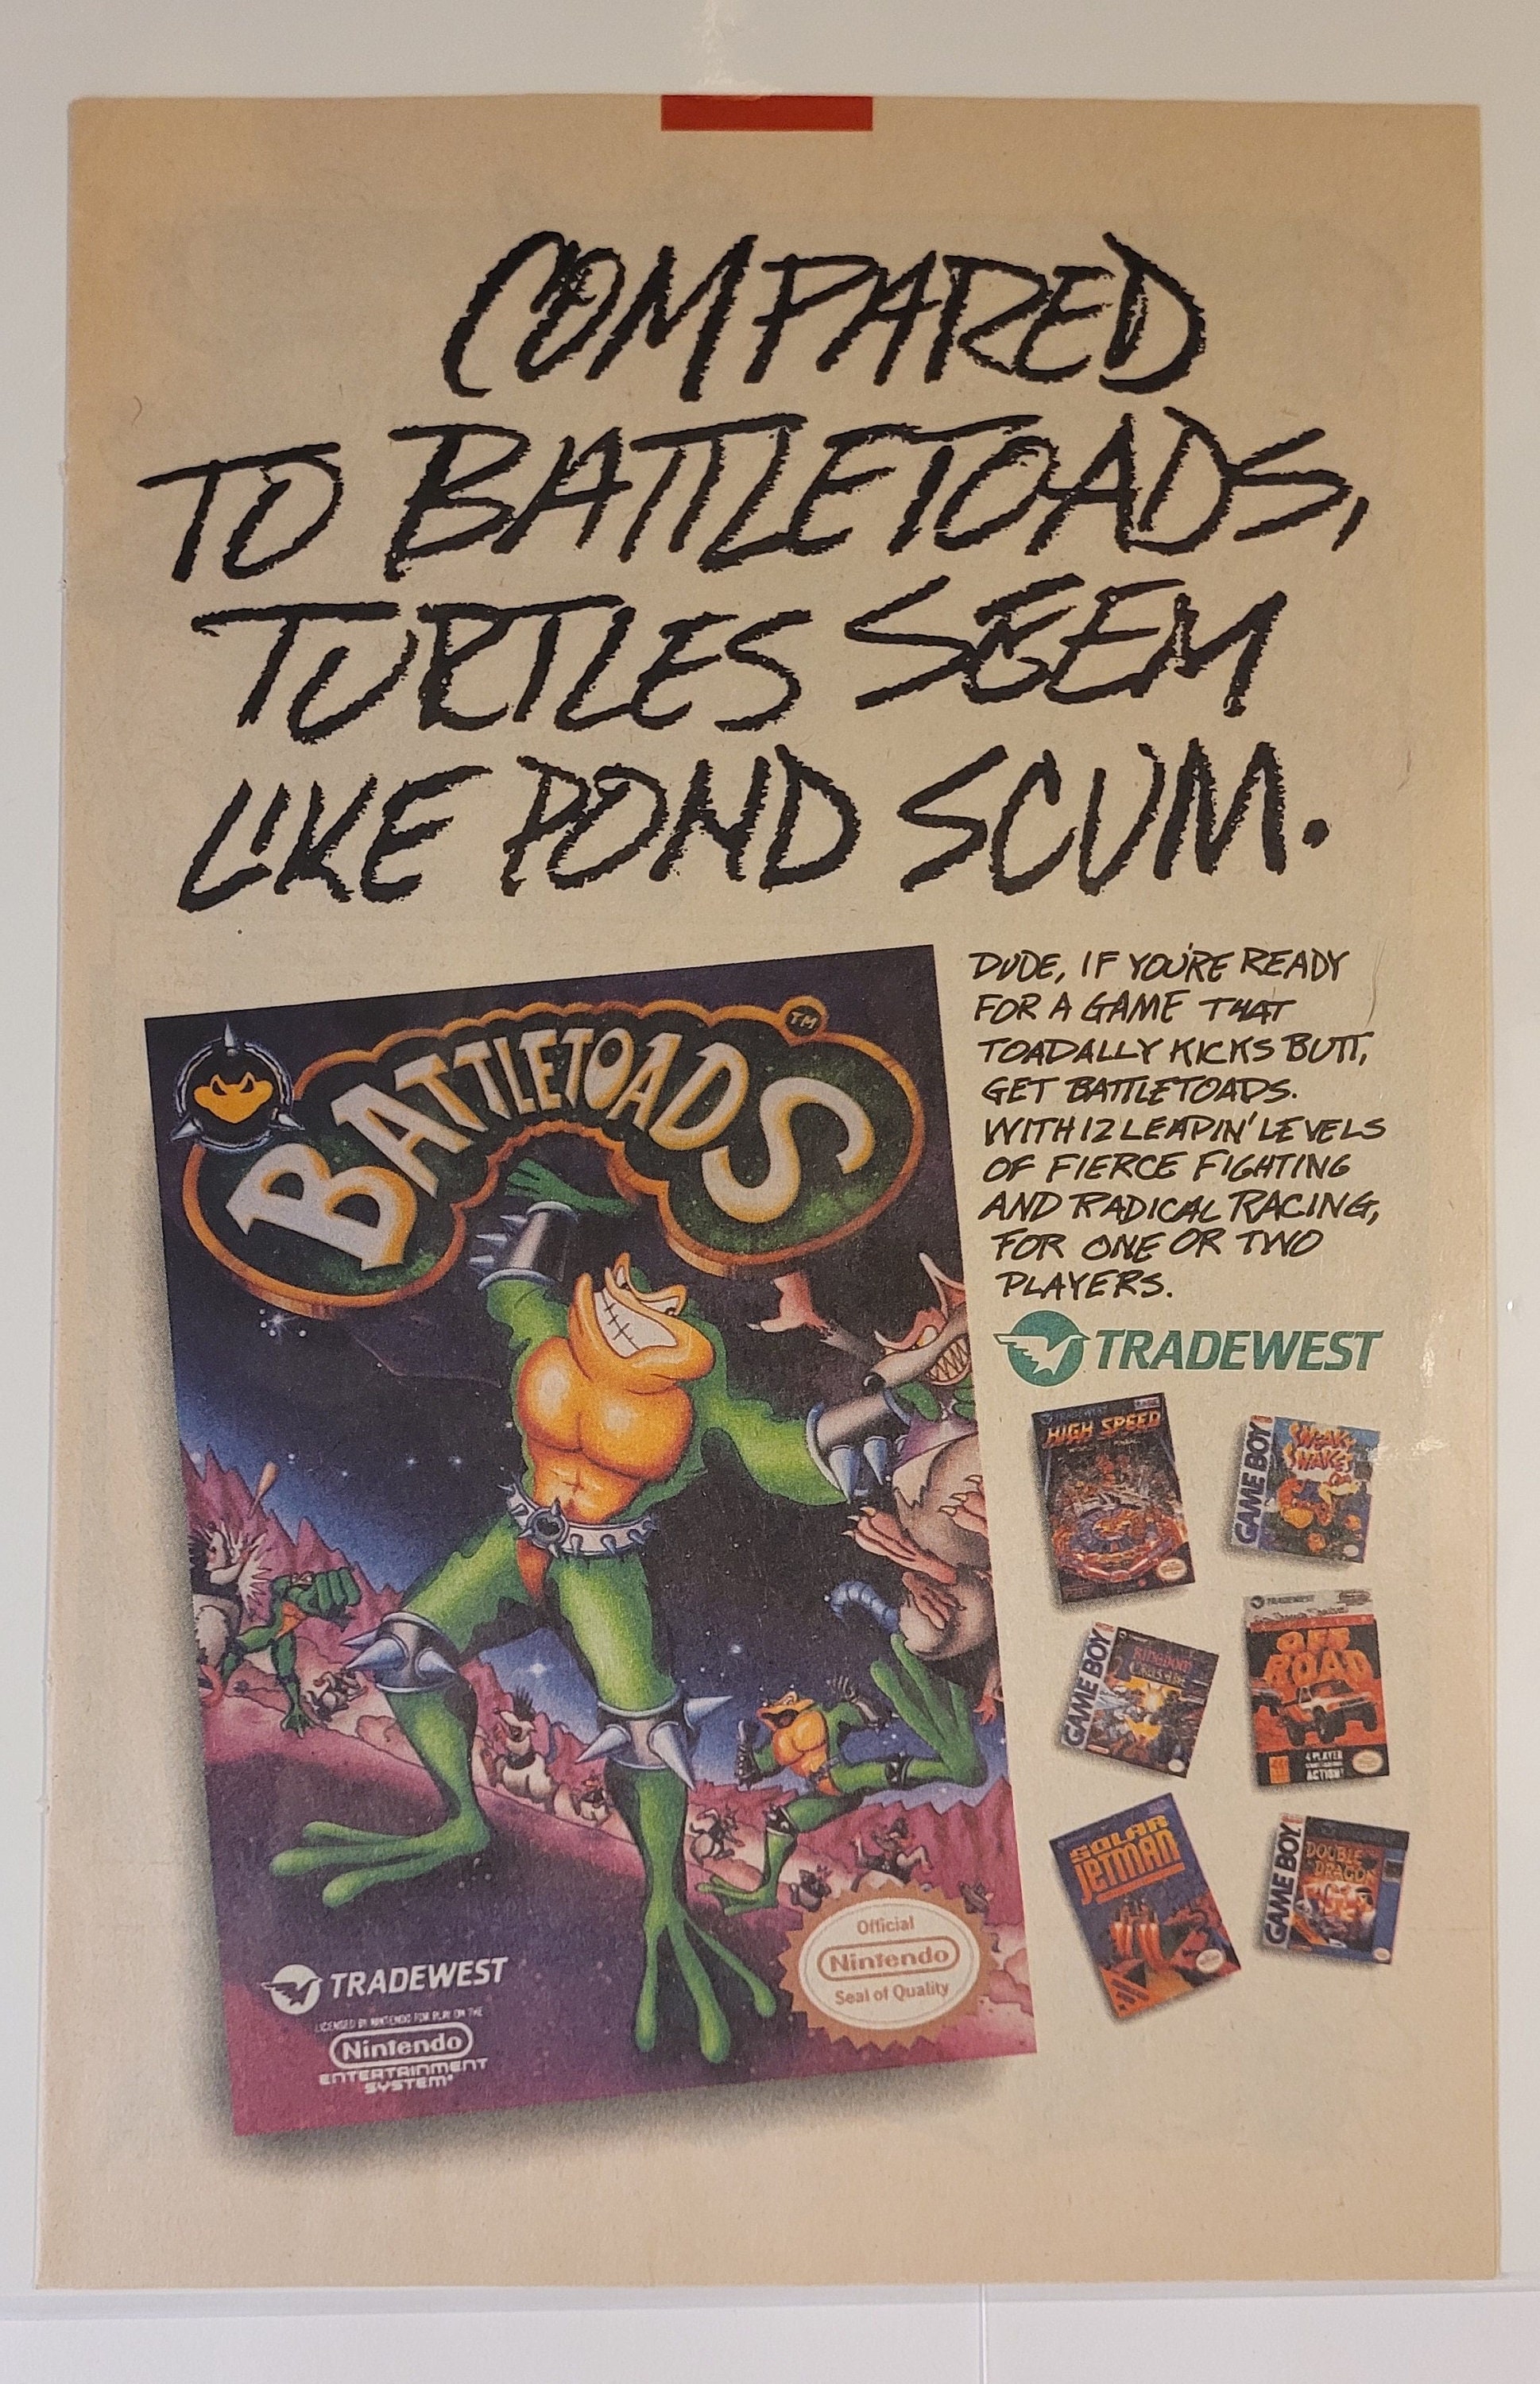 Battletoads Gets Almost 25 Minutes Of Brawling Gameplay